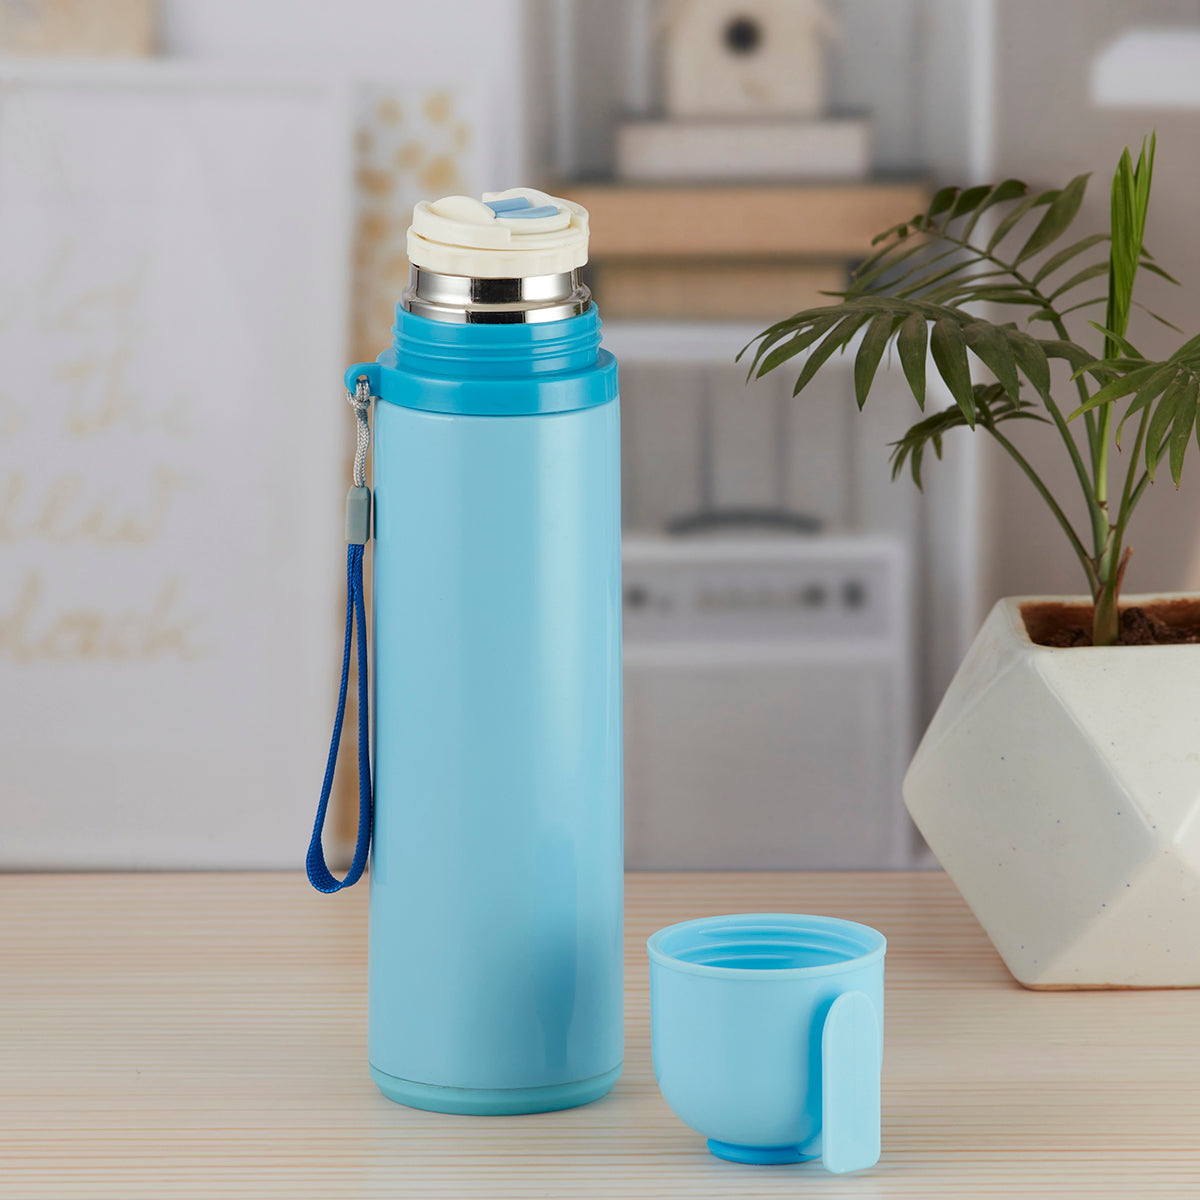 Stainless Steel Vacuum Insulated double wall Water Bottle for Home, Office, Travel and Sports, Leak - proof Lid for Hot and Cold liquids - 500ml (102-B)